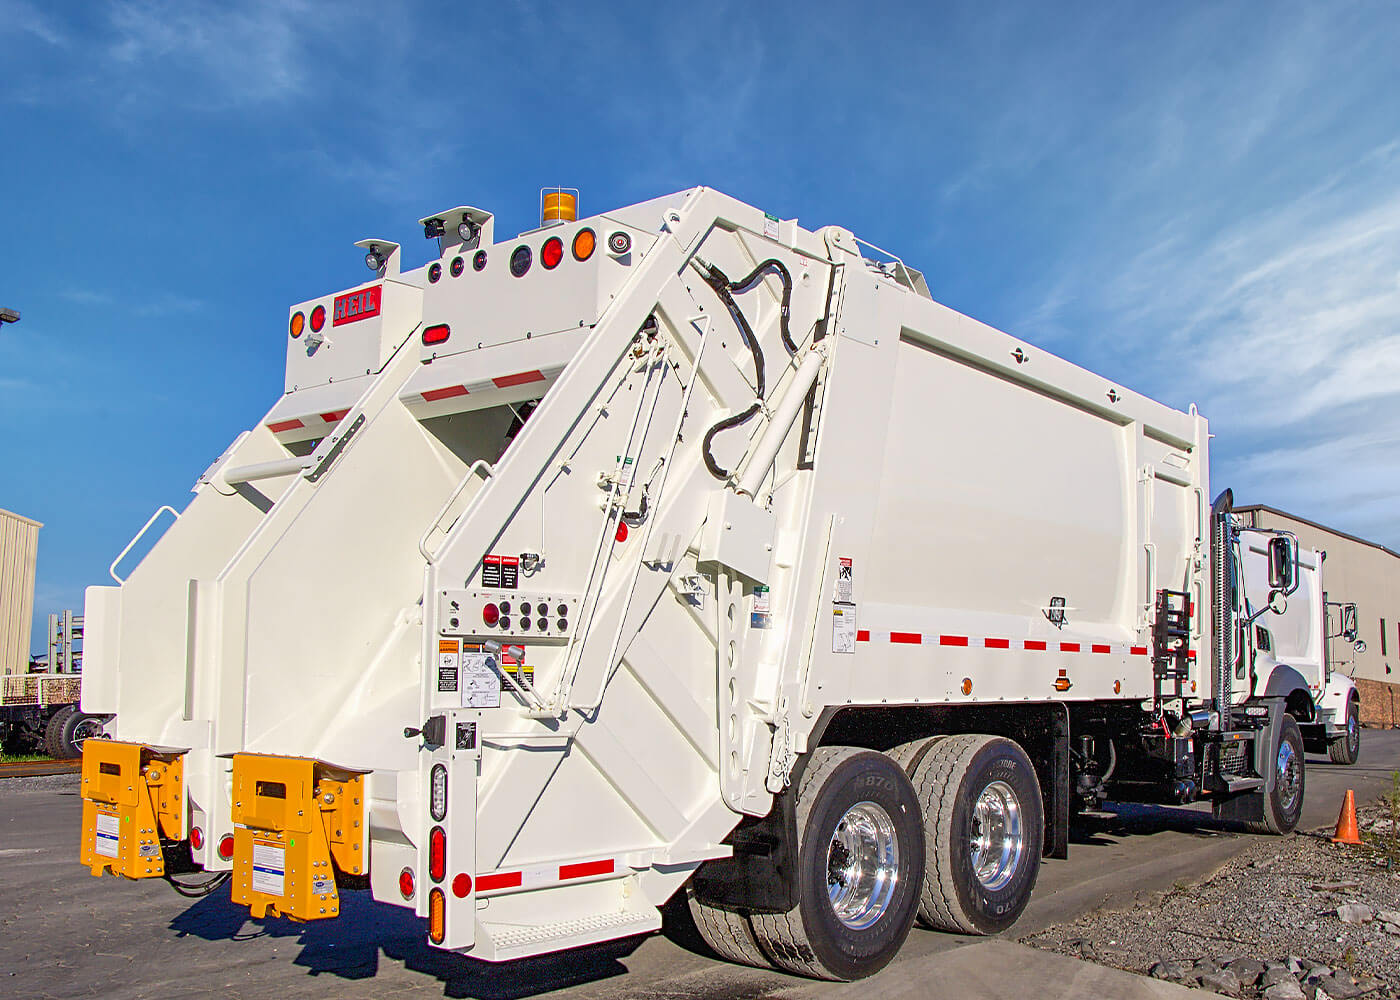 Two Compartment Garbage Trucks with twin sections for recycling and trash